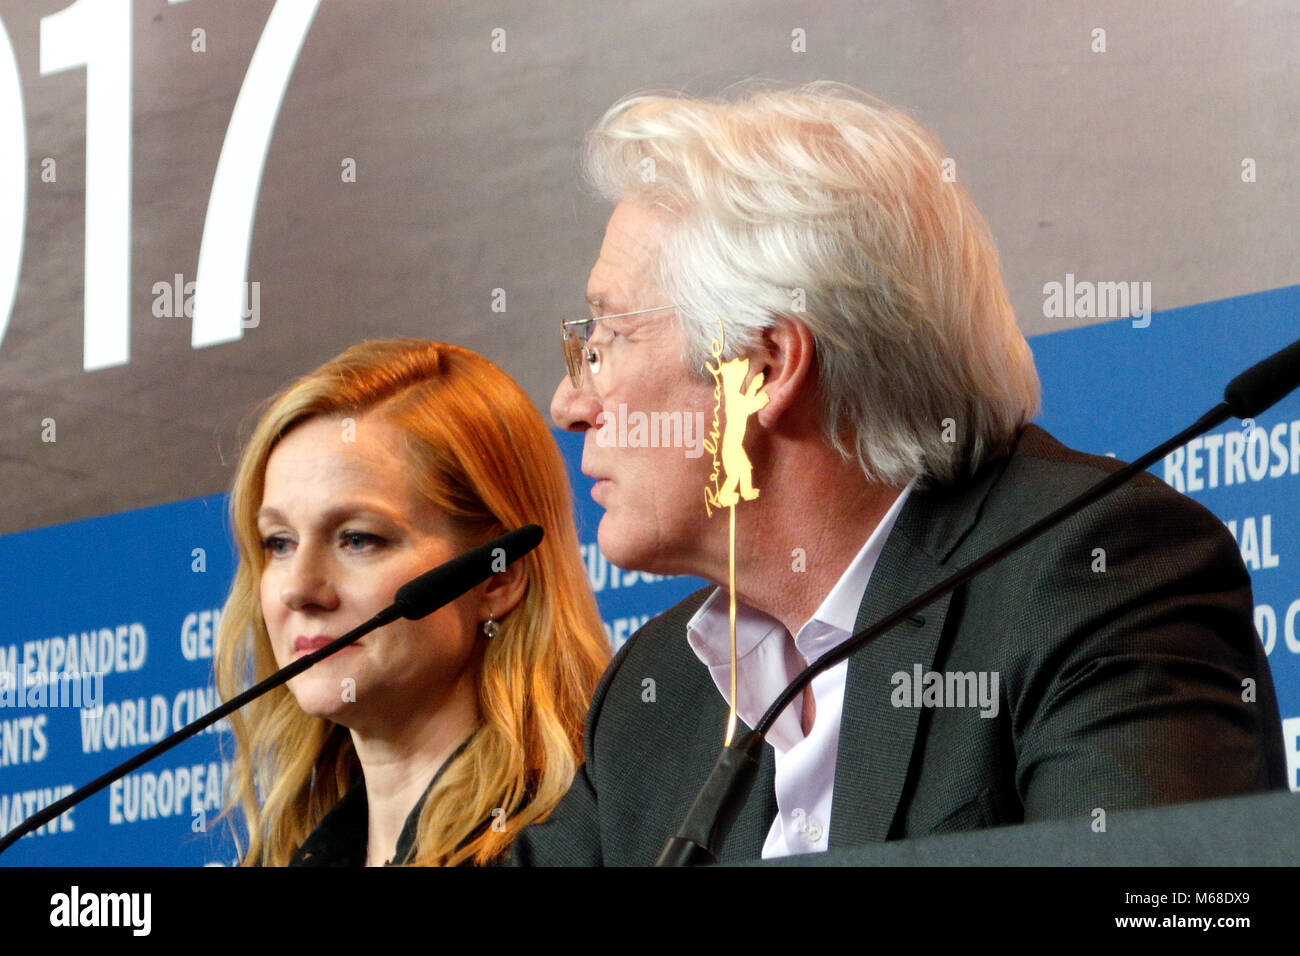 67th Berlin International Film Festival (Berlinale) - 'The Dinner' - Press Conference Featuring: Laura Linney, Richard Gere Where: Berlin, Germany Whe Stock Photo